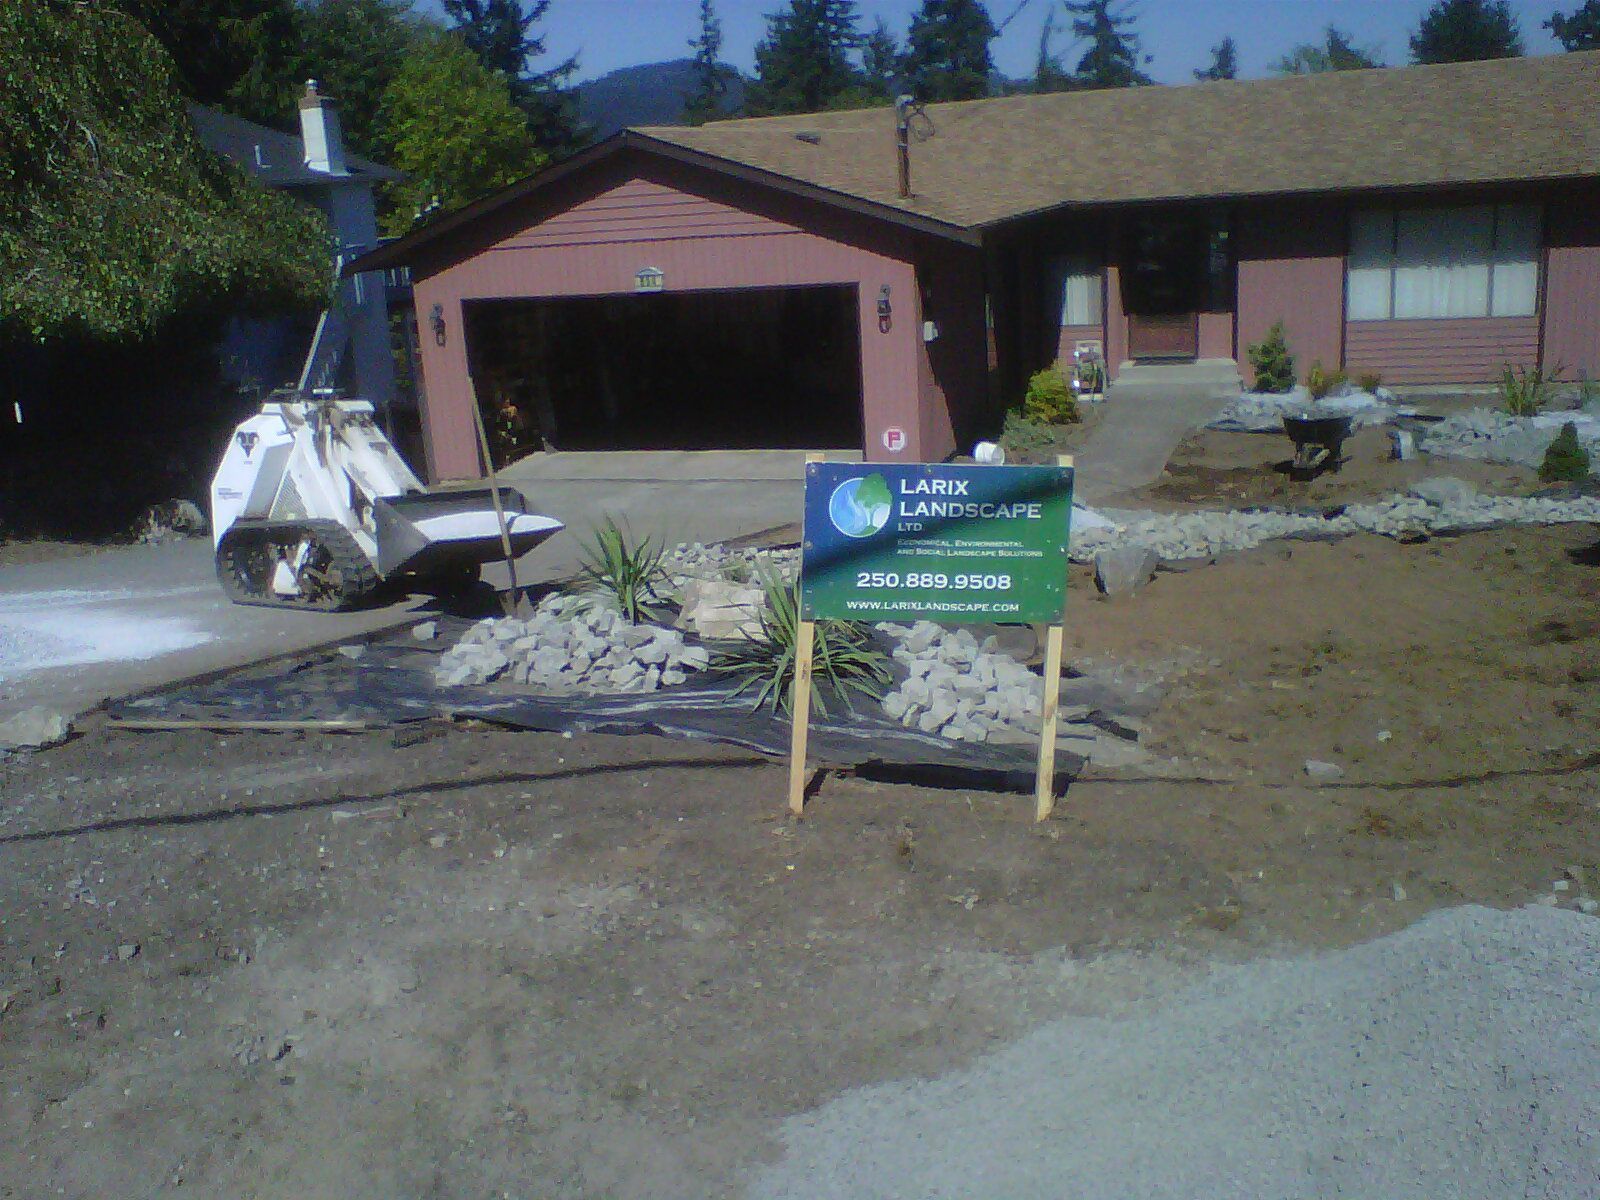 Larix Landscape picket sign planted in excavated property in front of bobcat excavator